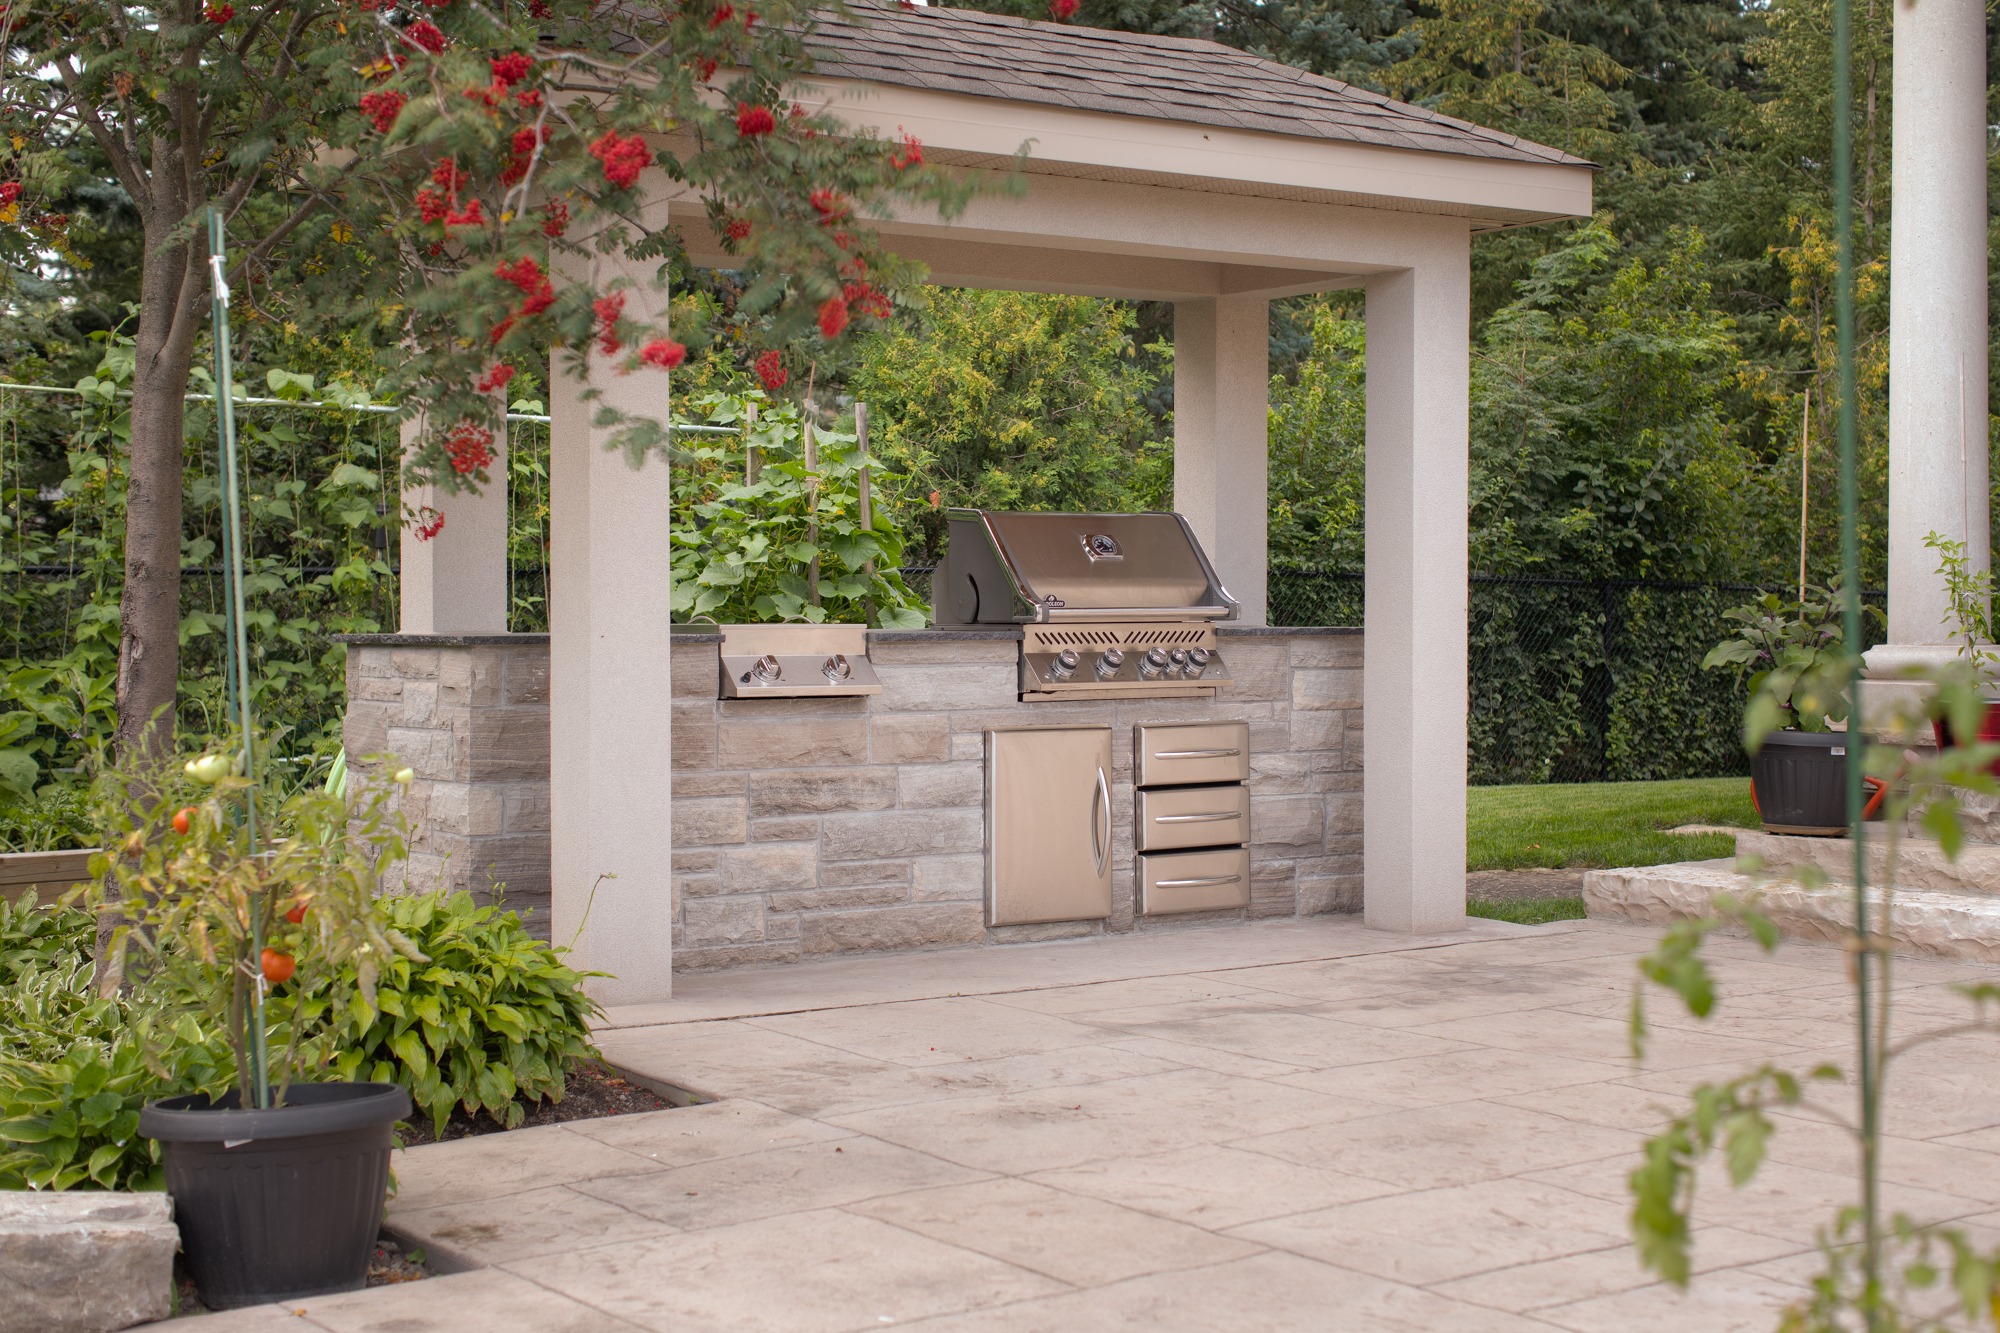 An outdoor kitchen pavilion with a built-in stainless steel grill, storage drawers, under a shelter, surrounded by green plants, and red flowers.